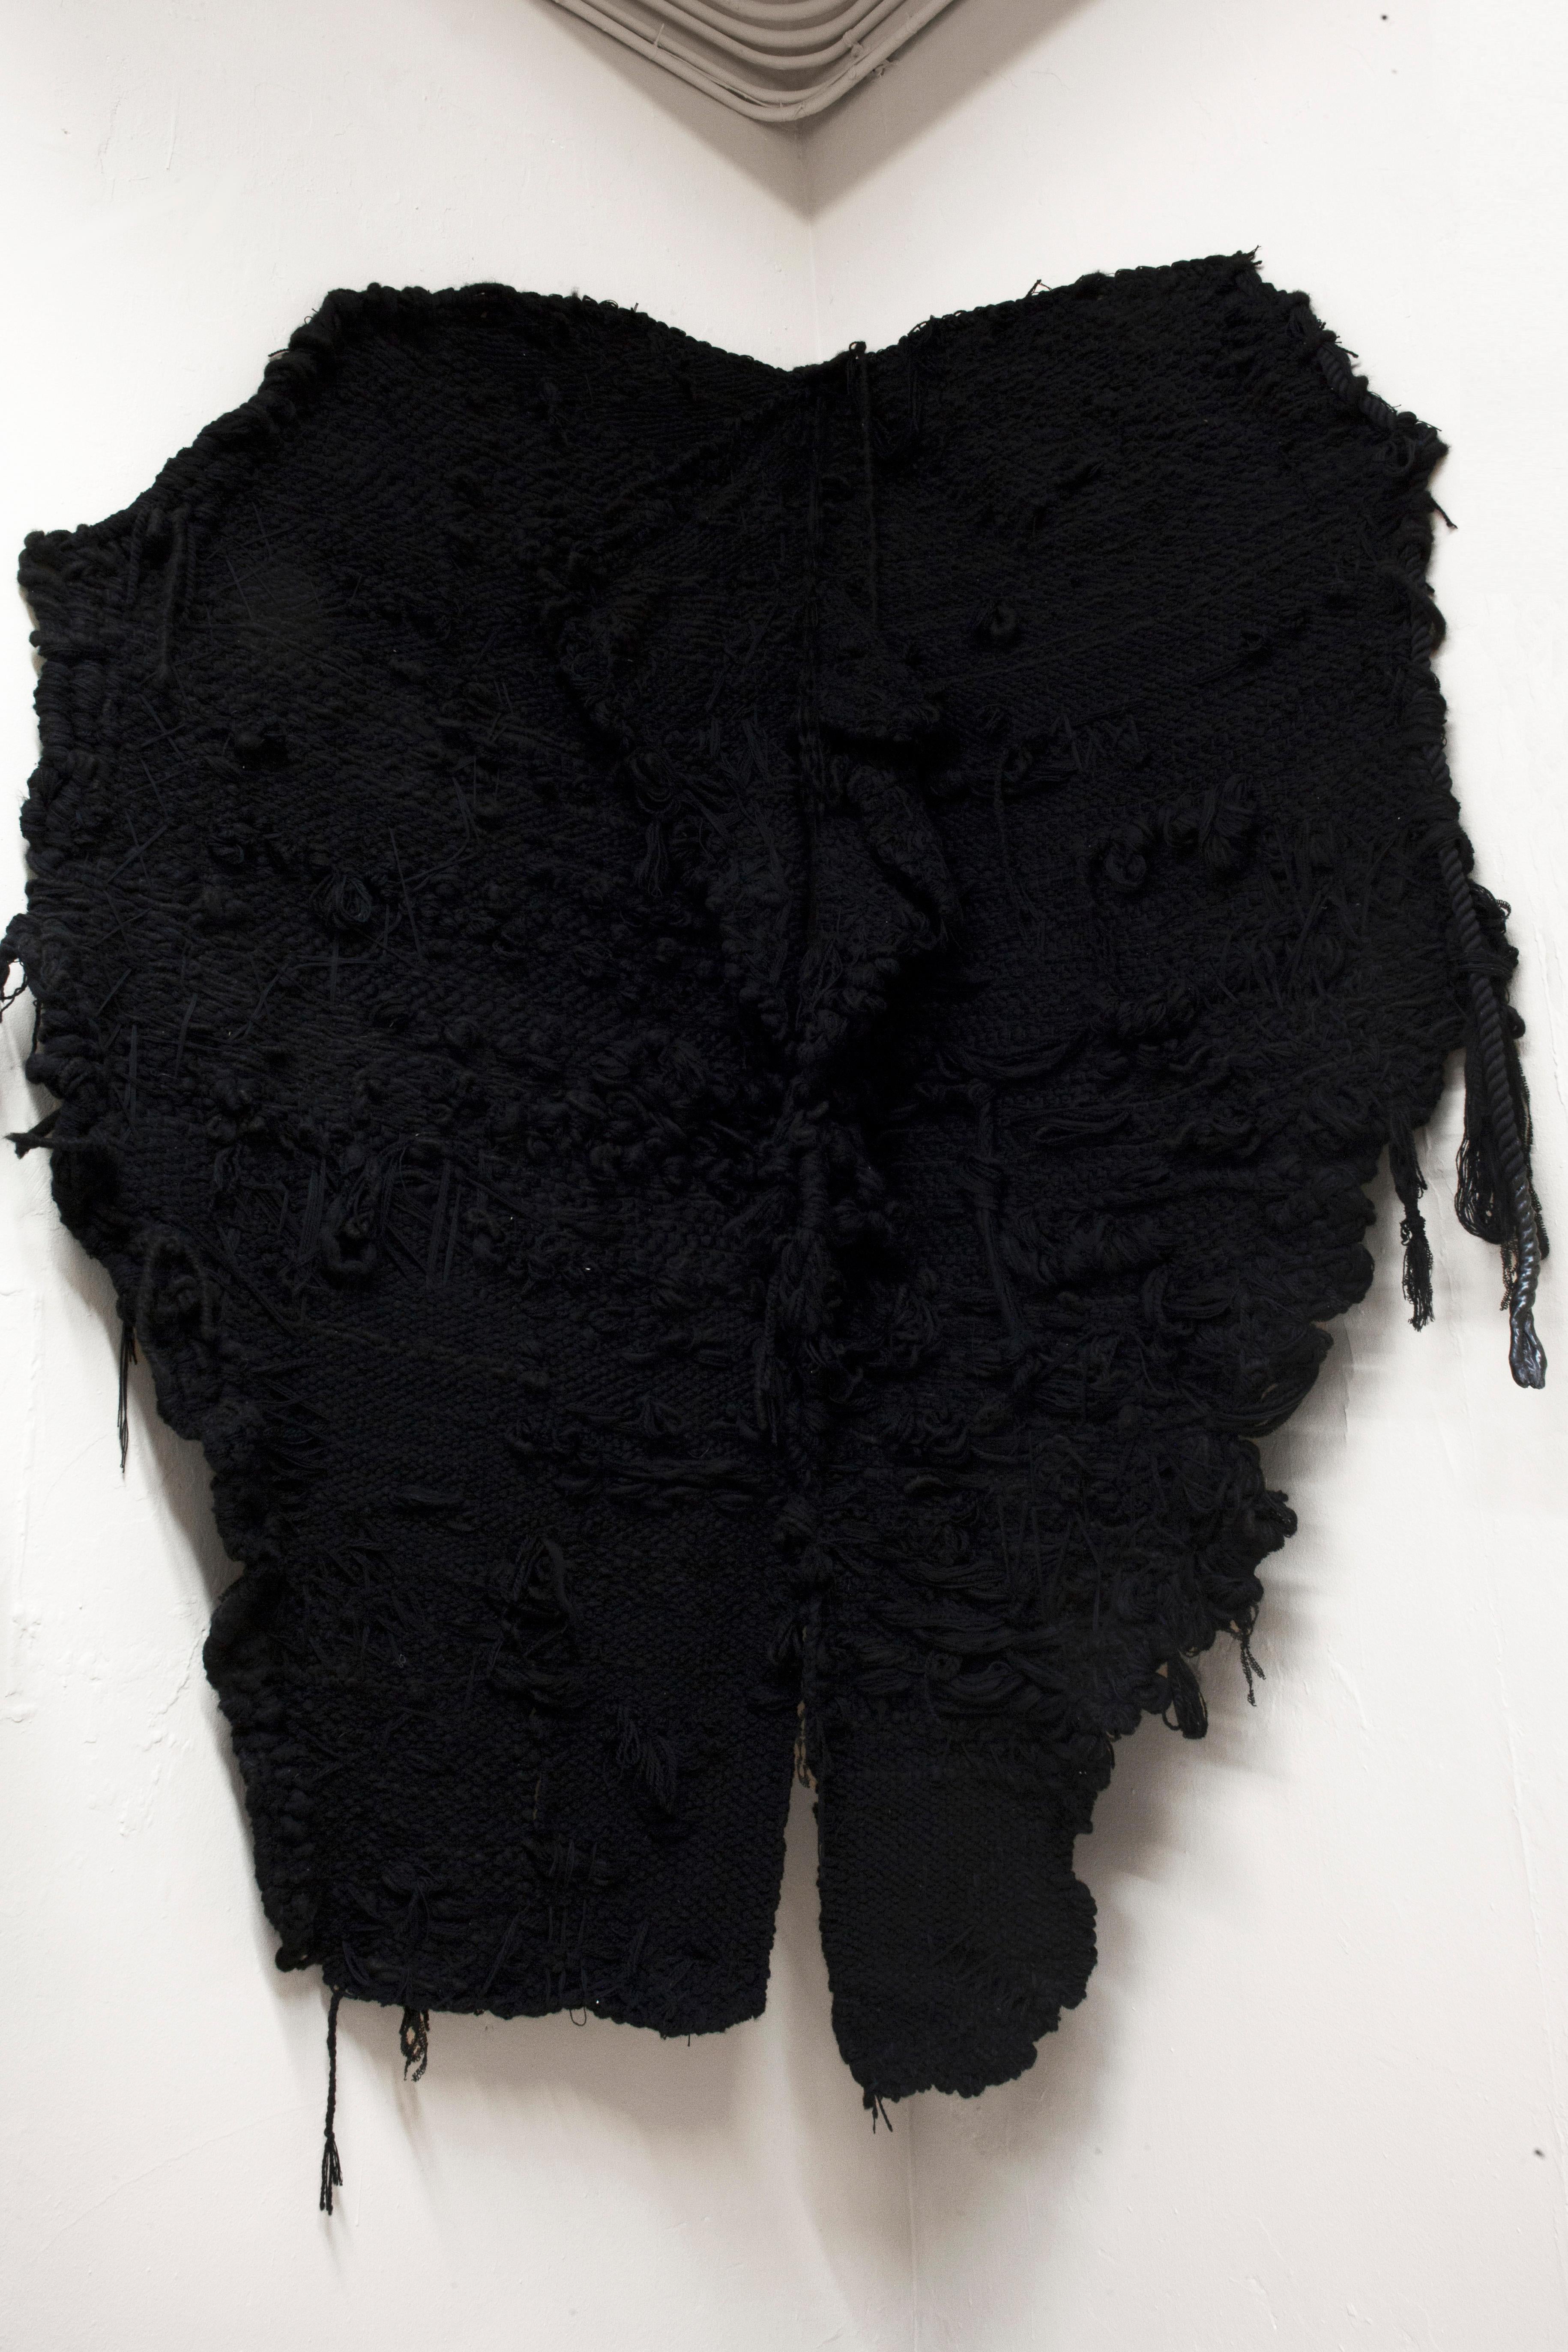 Material Lust [American, b.1981,1986]
Derma Skin II, 2016 
Alpaca, rope, wool, cotton, leather and rubber tool dip on cotton warp 
Measures 6' W x 9' L 
One of a kind.
This piece is currently available to view in Los Angeles. 

DERMA was created in